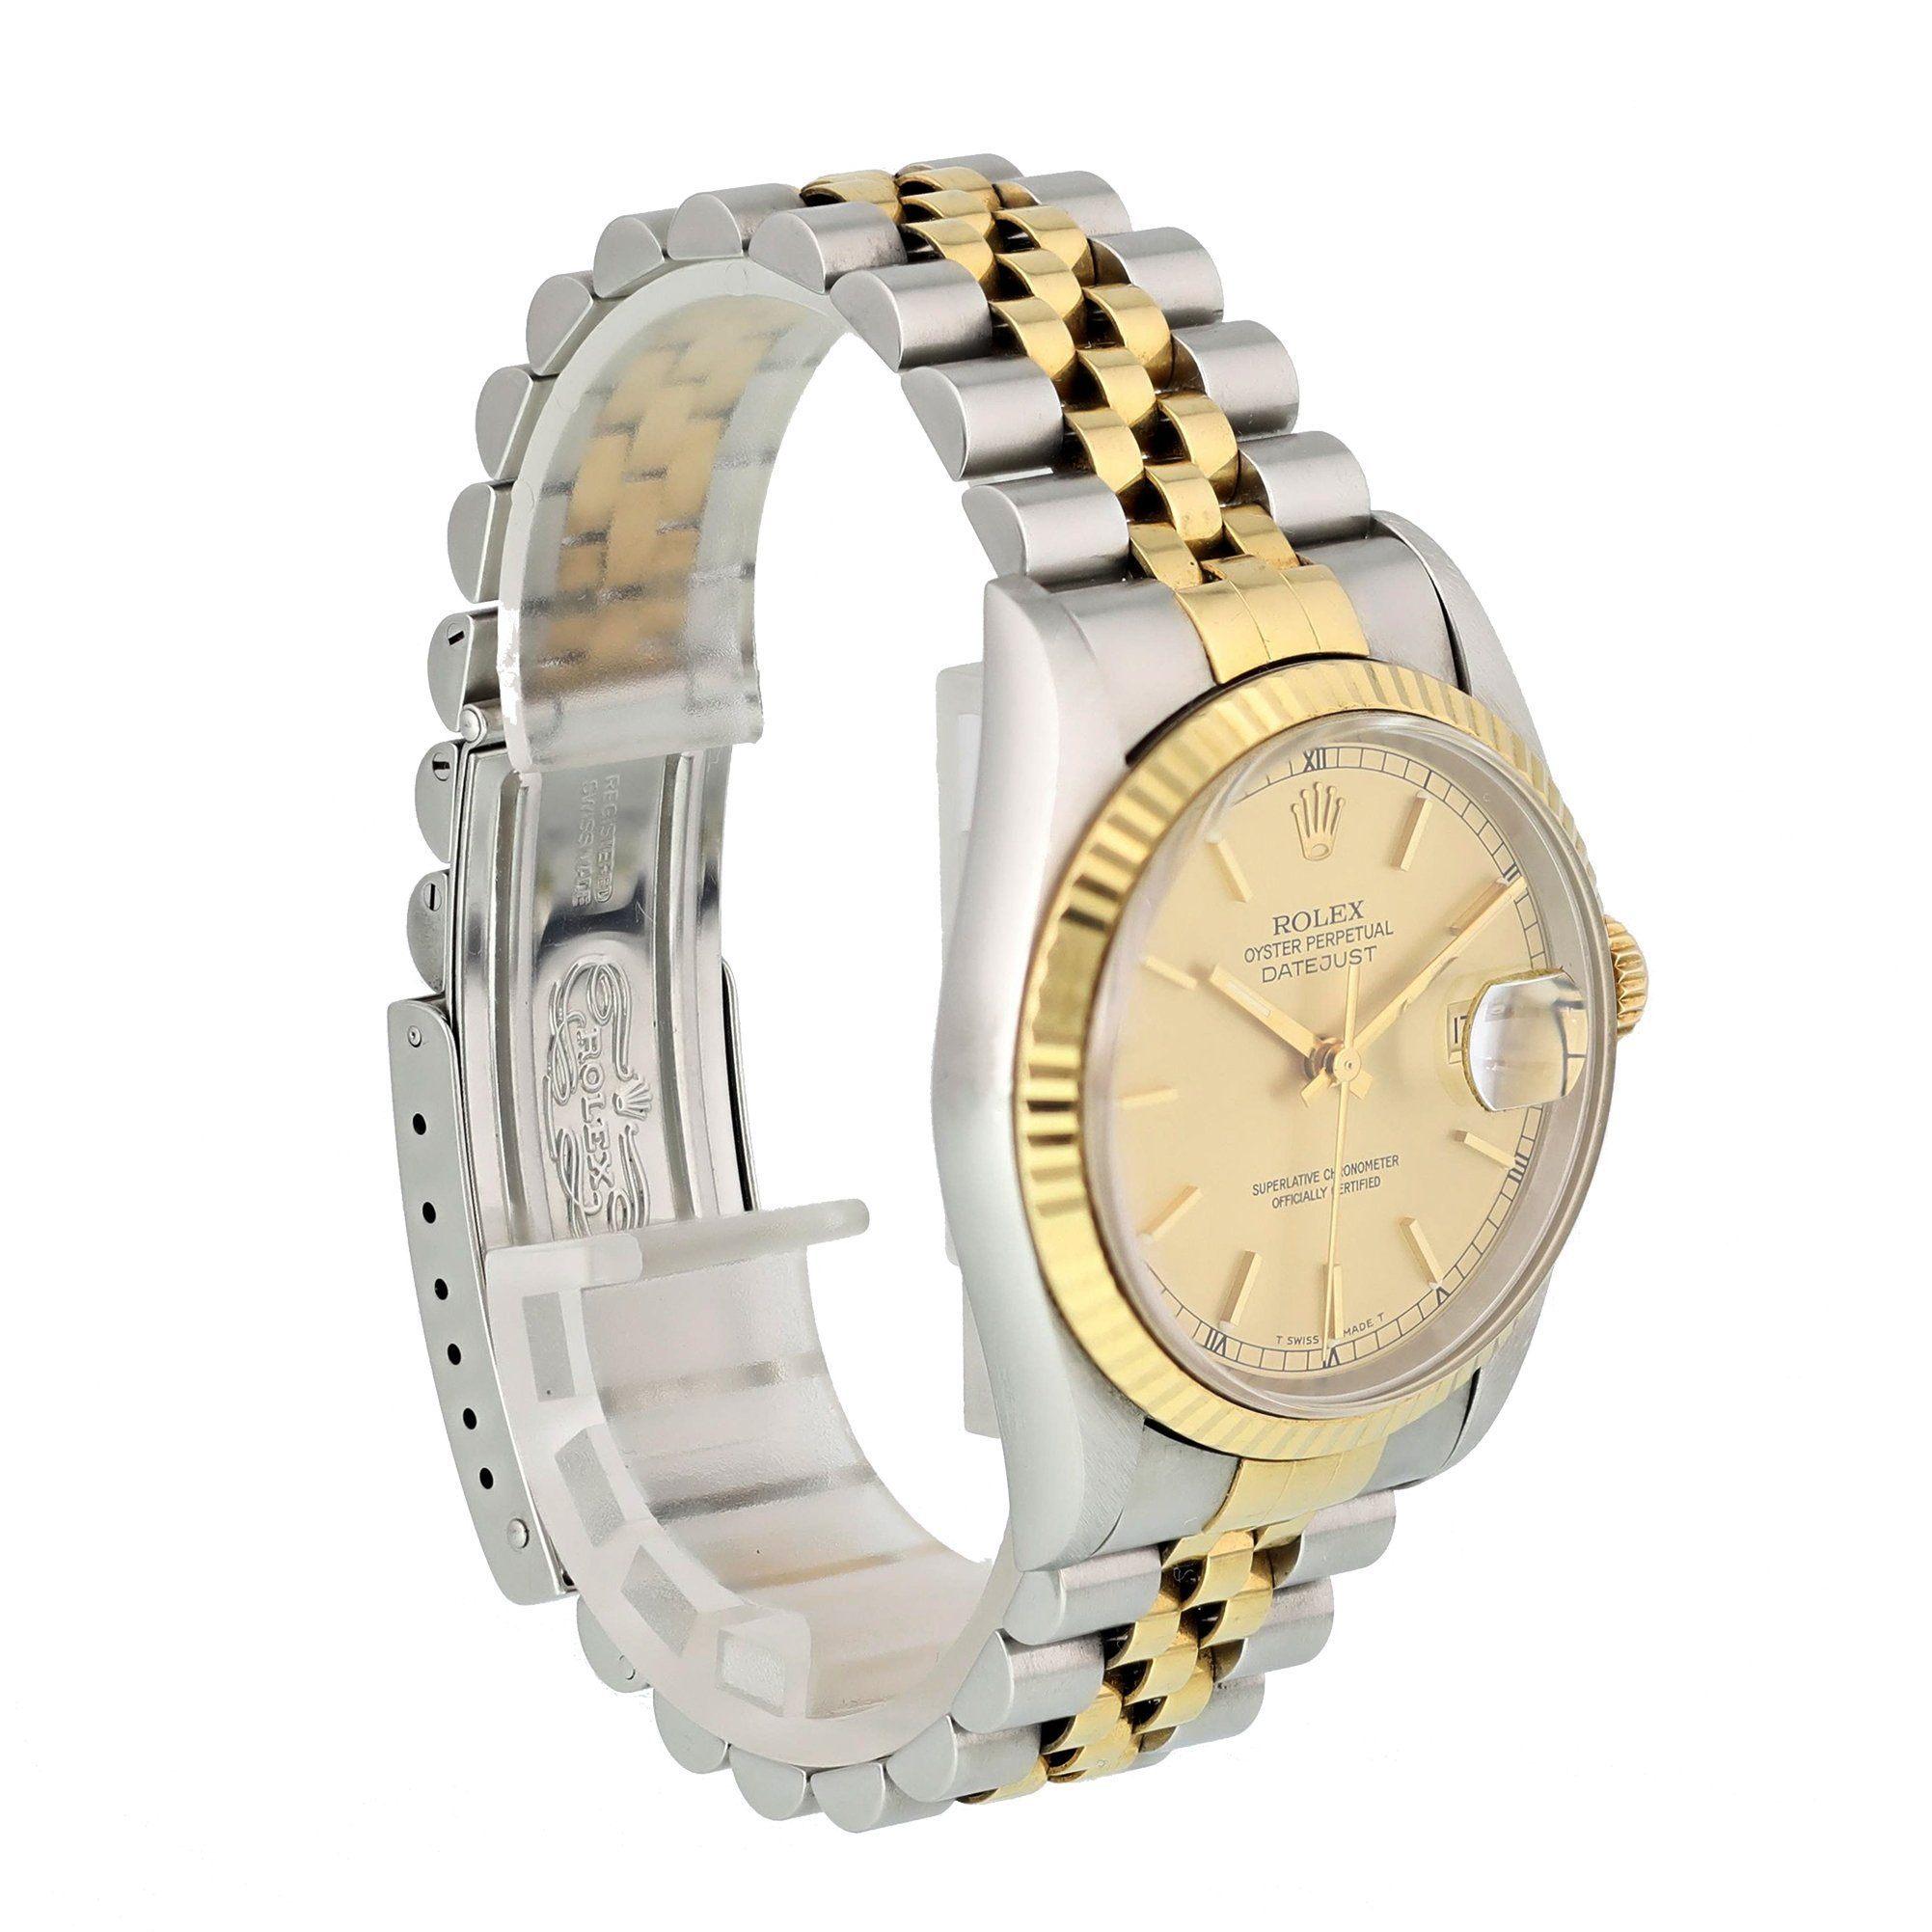 Rolex Datejust 16233 Men's Watch Box & Papers In Excellent Condition For Sale In New York, NY